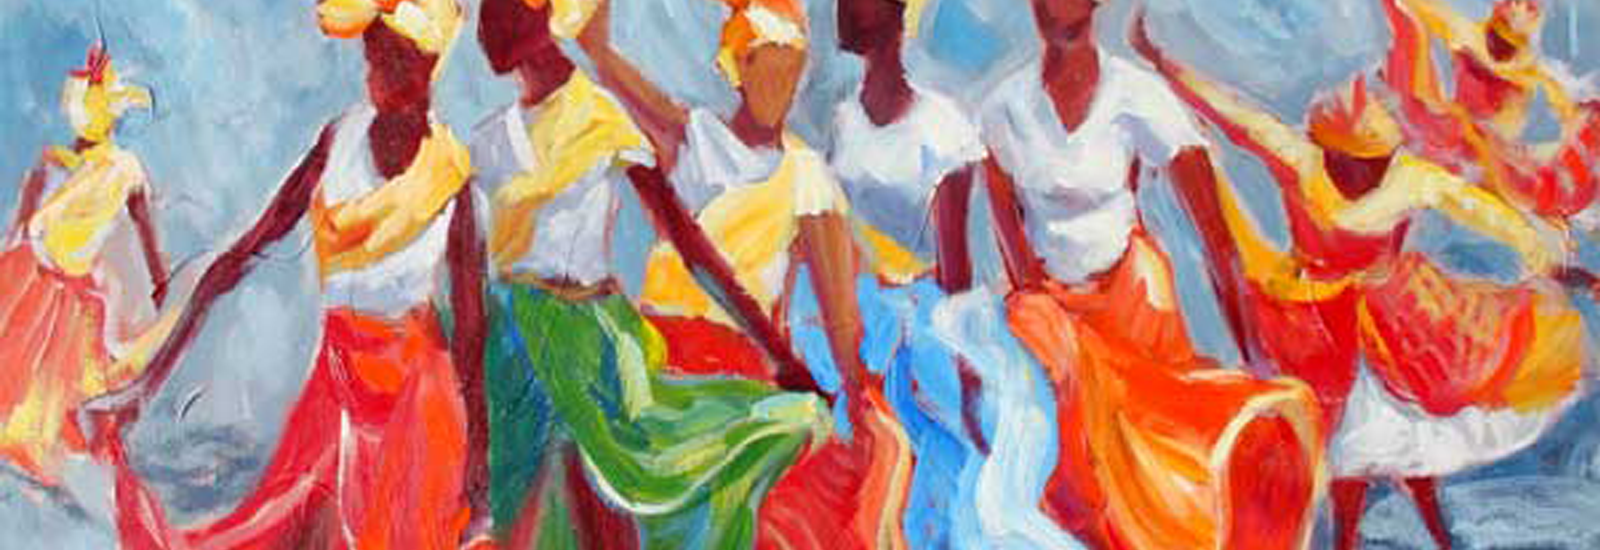 Painting of traditional Caribbean Bele dancers dressed in a mixture of green, blue and orange skirts with yellow scarves and head wrappings.